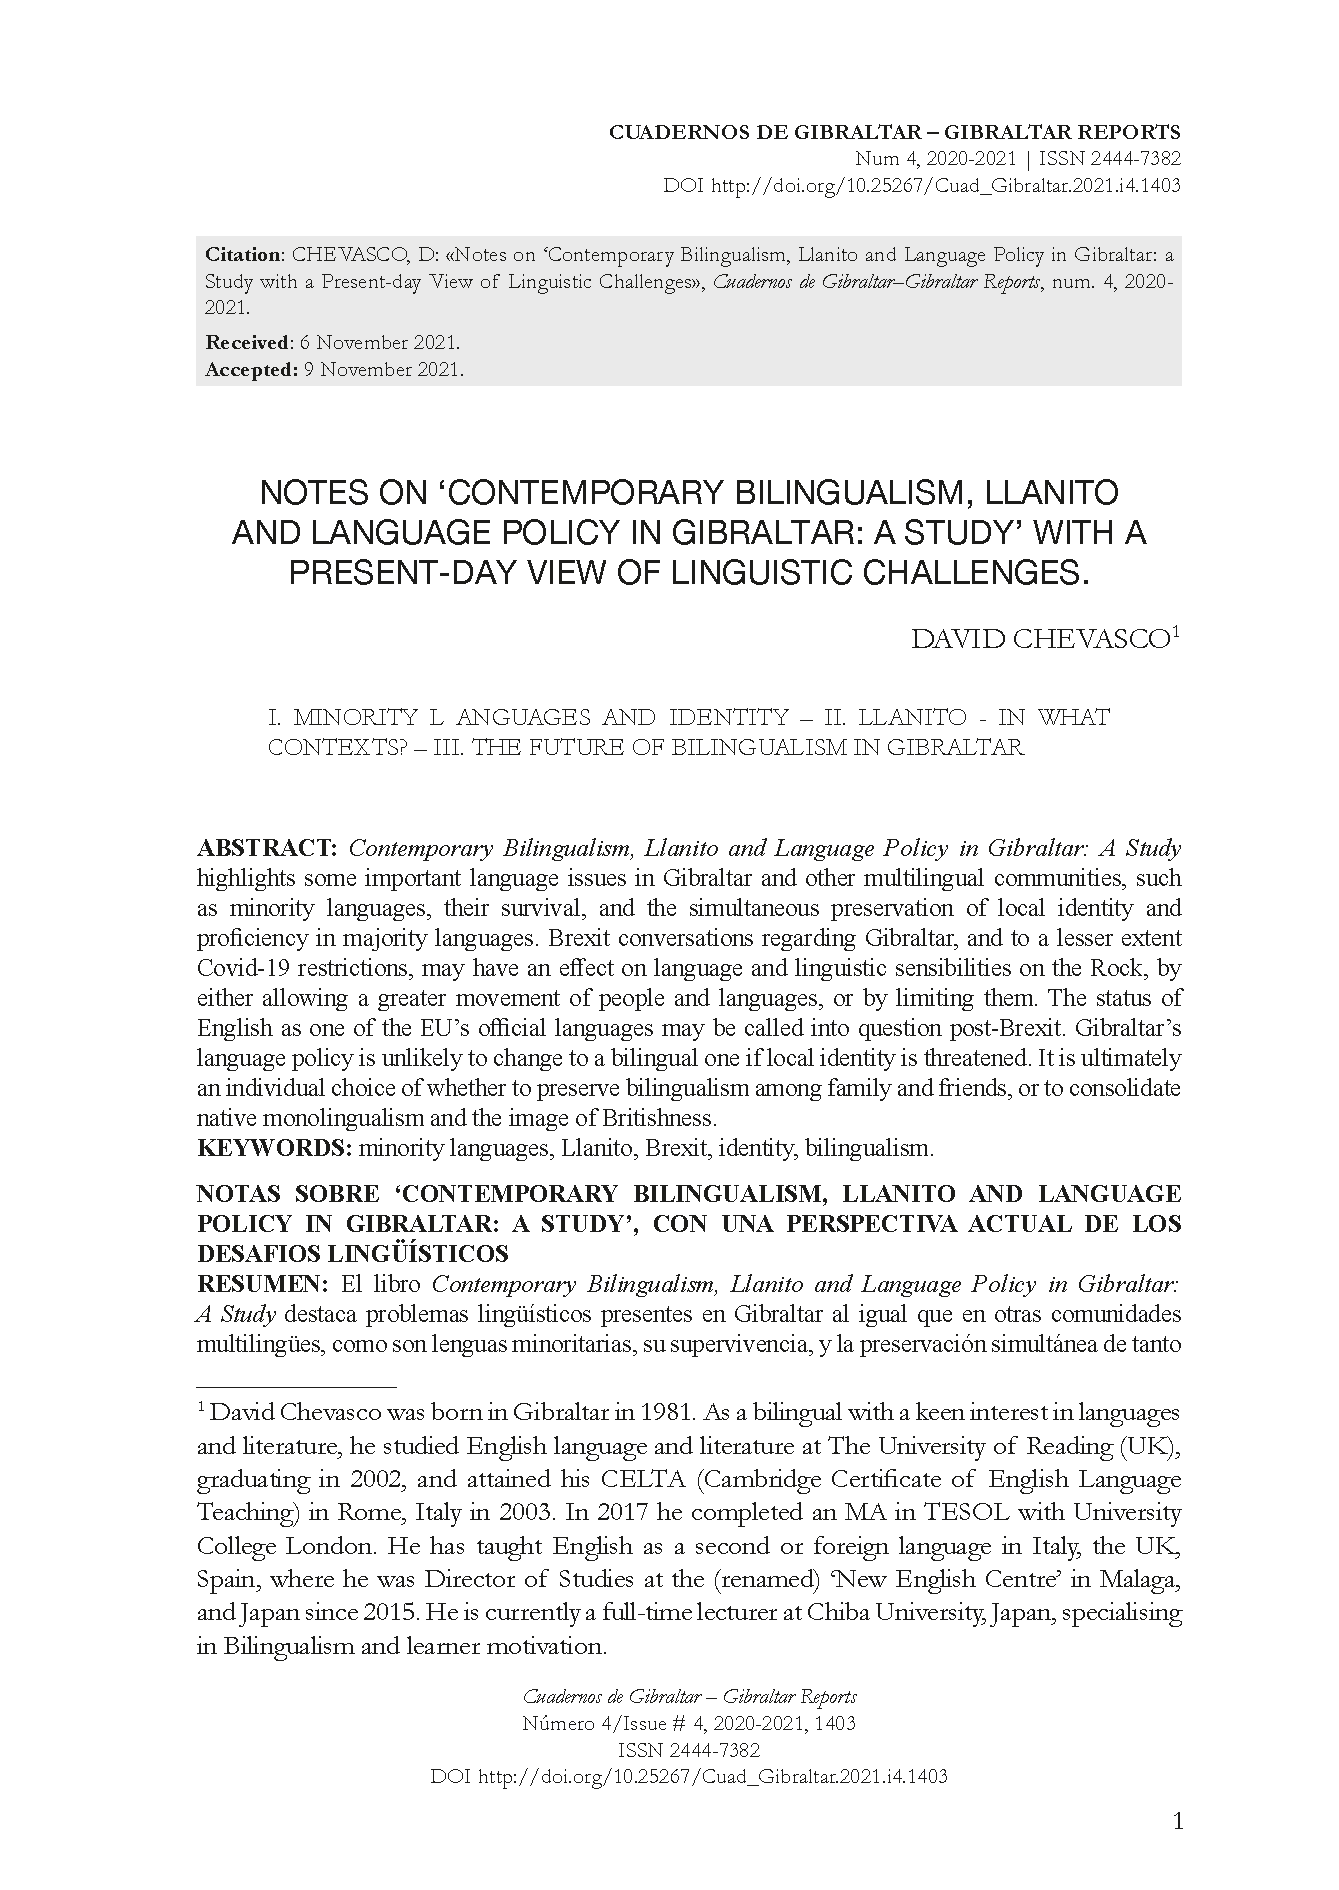 Notes on ‘Contemporary Bilingualism, Llanito and Language Policy in Gibraltar: a Study with a Present-day View of Linguistic Challenges